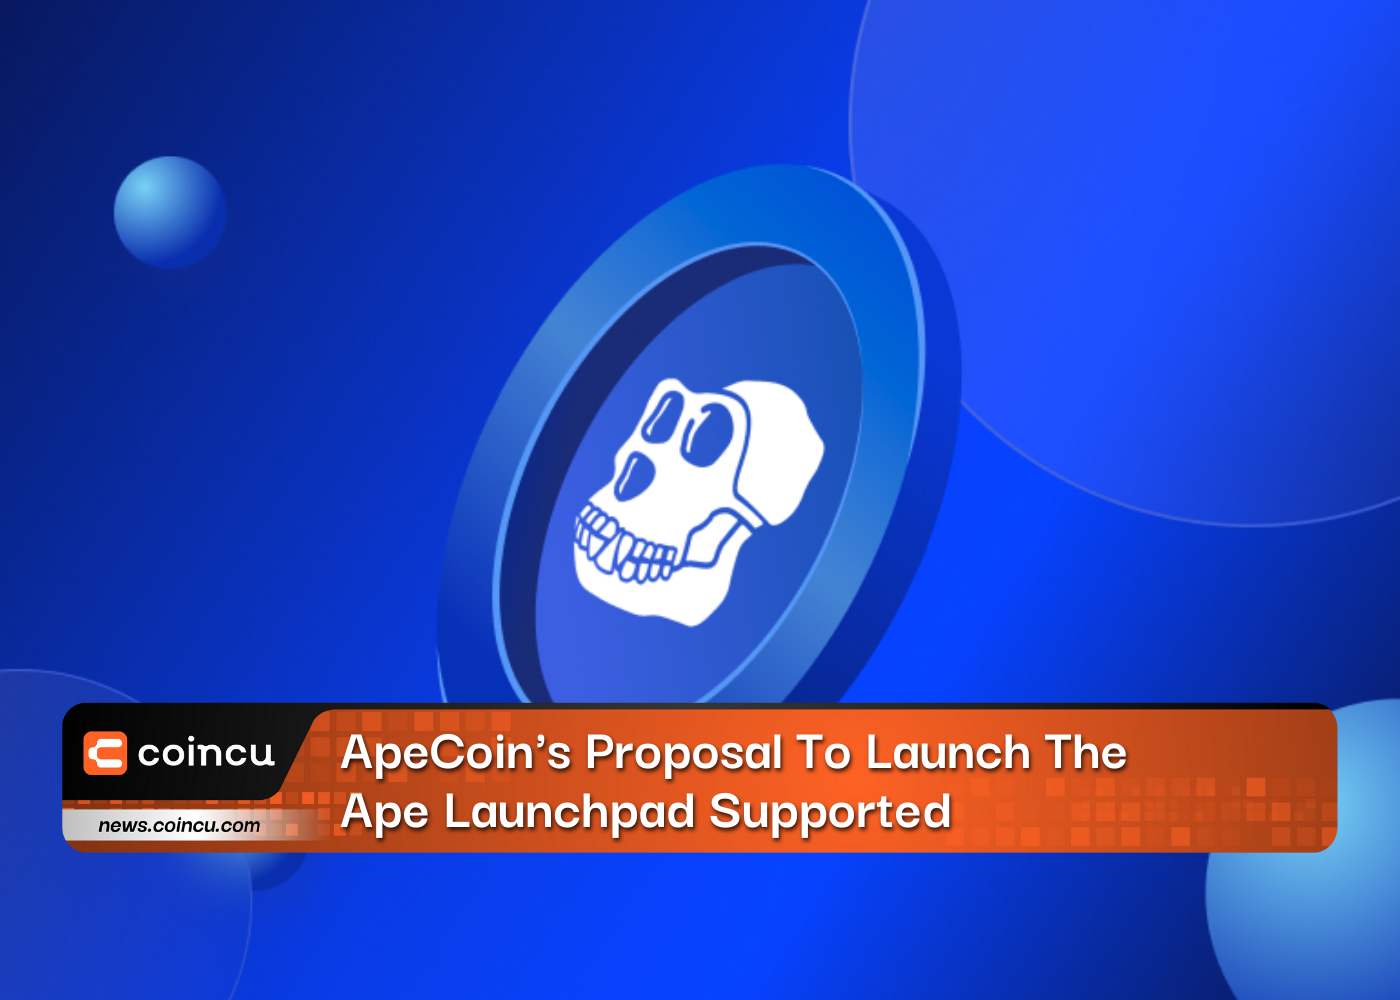 ApeCoin's Proposal To Launch The Ape Launchpad Supported